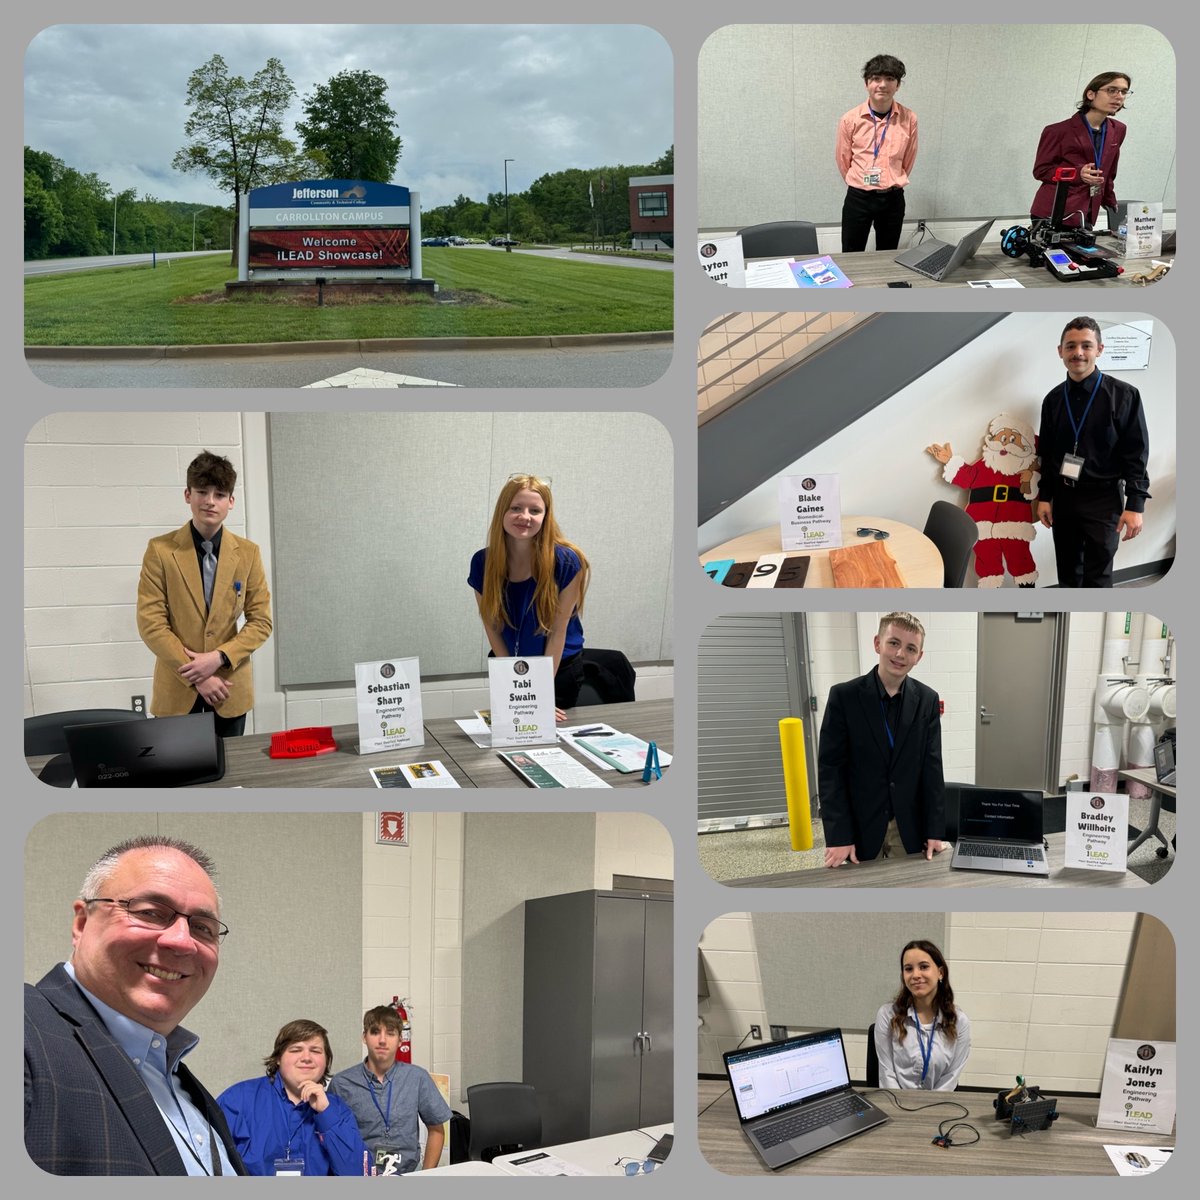 It was a great morning listening to our students present at the iLEAD Student Showcase at JCTC. I wish that I could have made it to all of the presentations! Great job presenting your learning and reflecting on how to grow as a student! #WEareOC #iLEAD #StudentShowcase